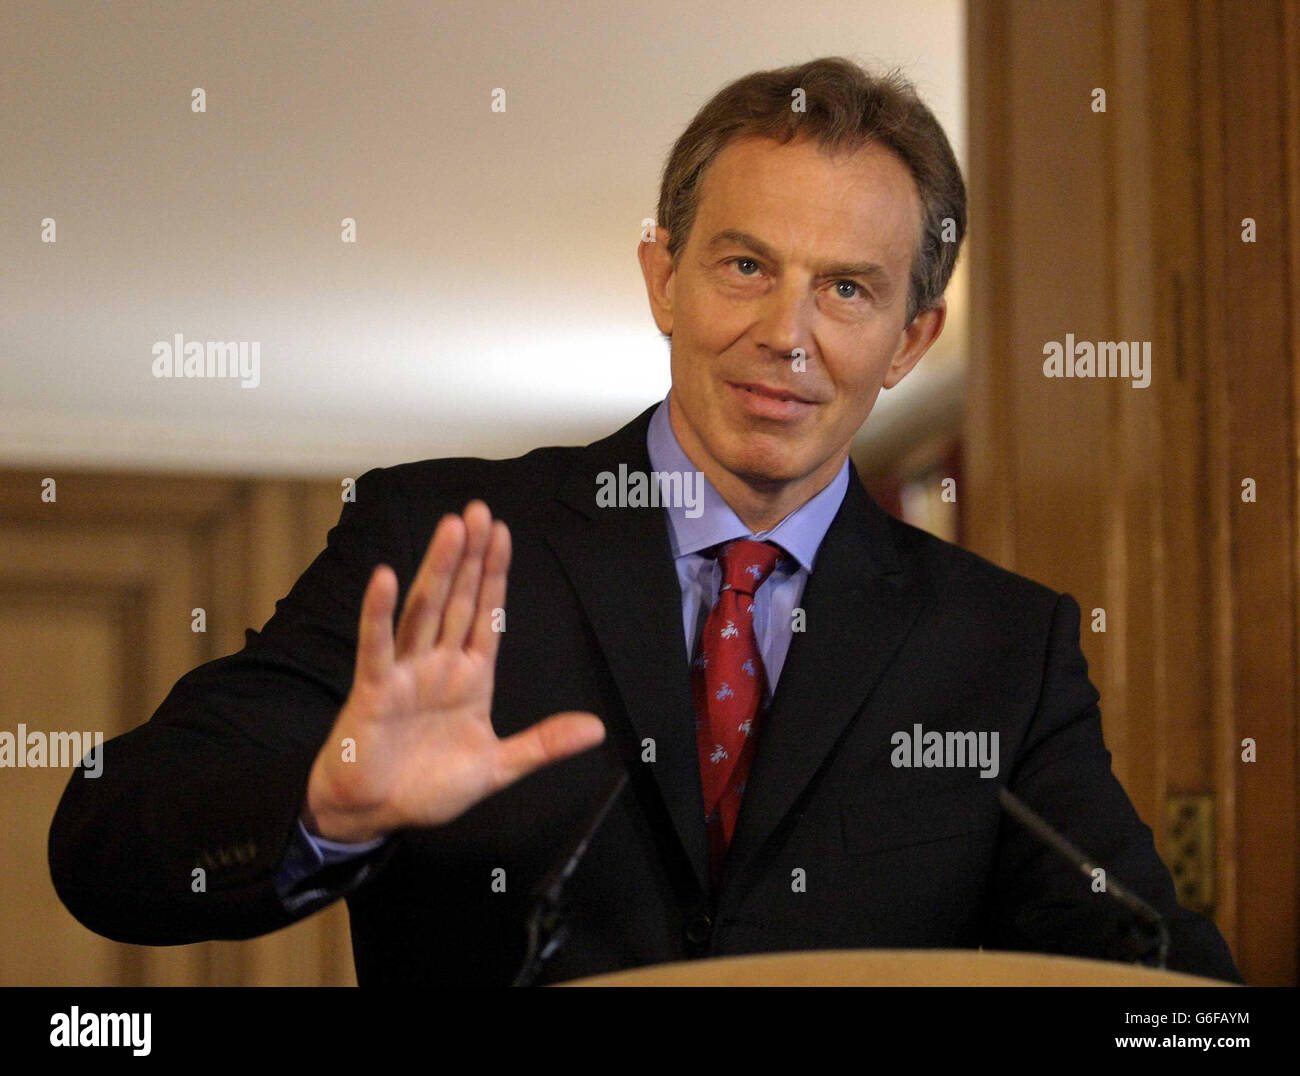 Britain's Prime Minister Tony Blair makes a point as he addresses the media during his monthly televised news conference in Downing Street in London. Blair accepted that he needed to rebuild public trust following the war in Iraq and the death of Government weapons expert David Kelly. Stock Photo